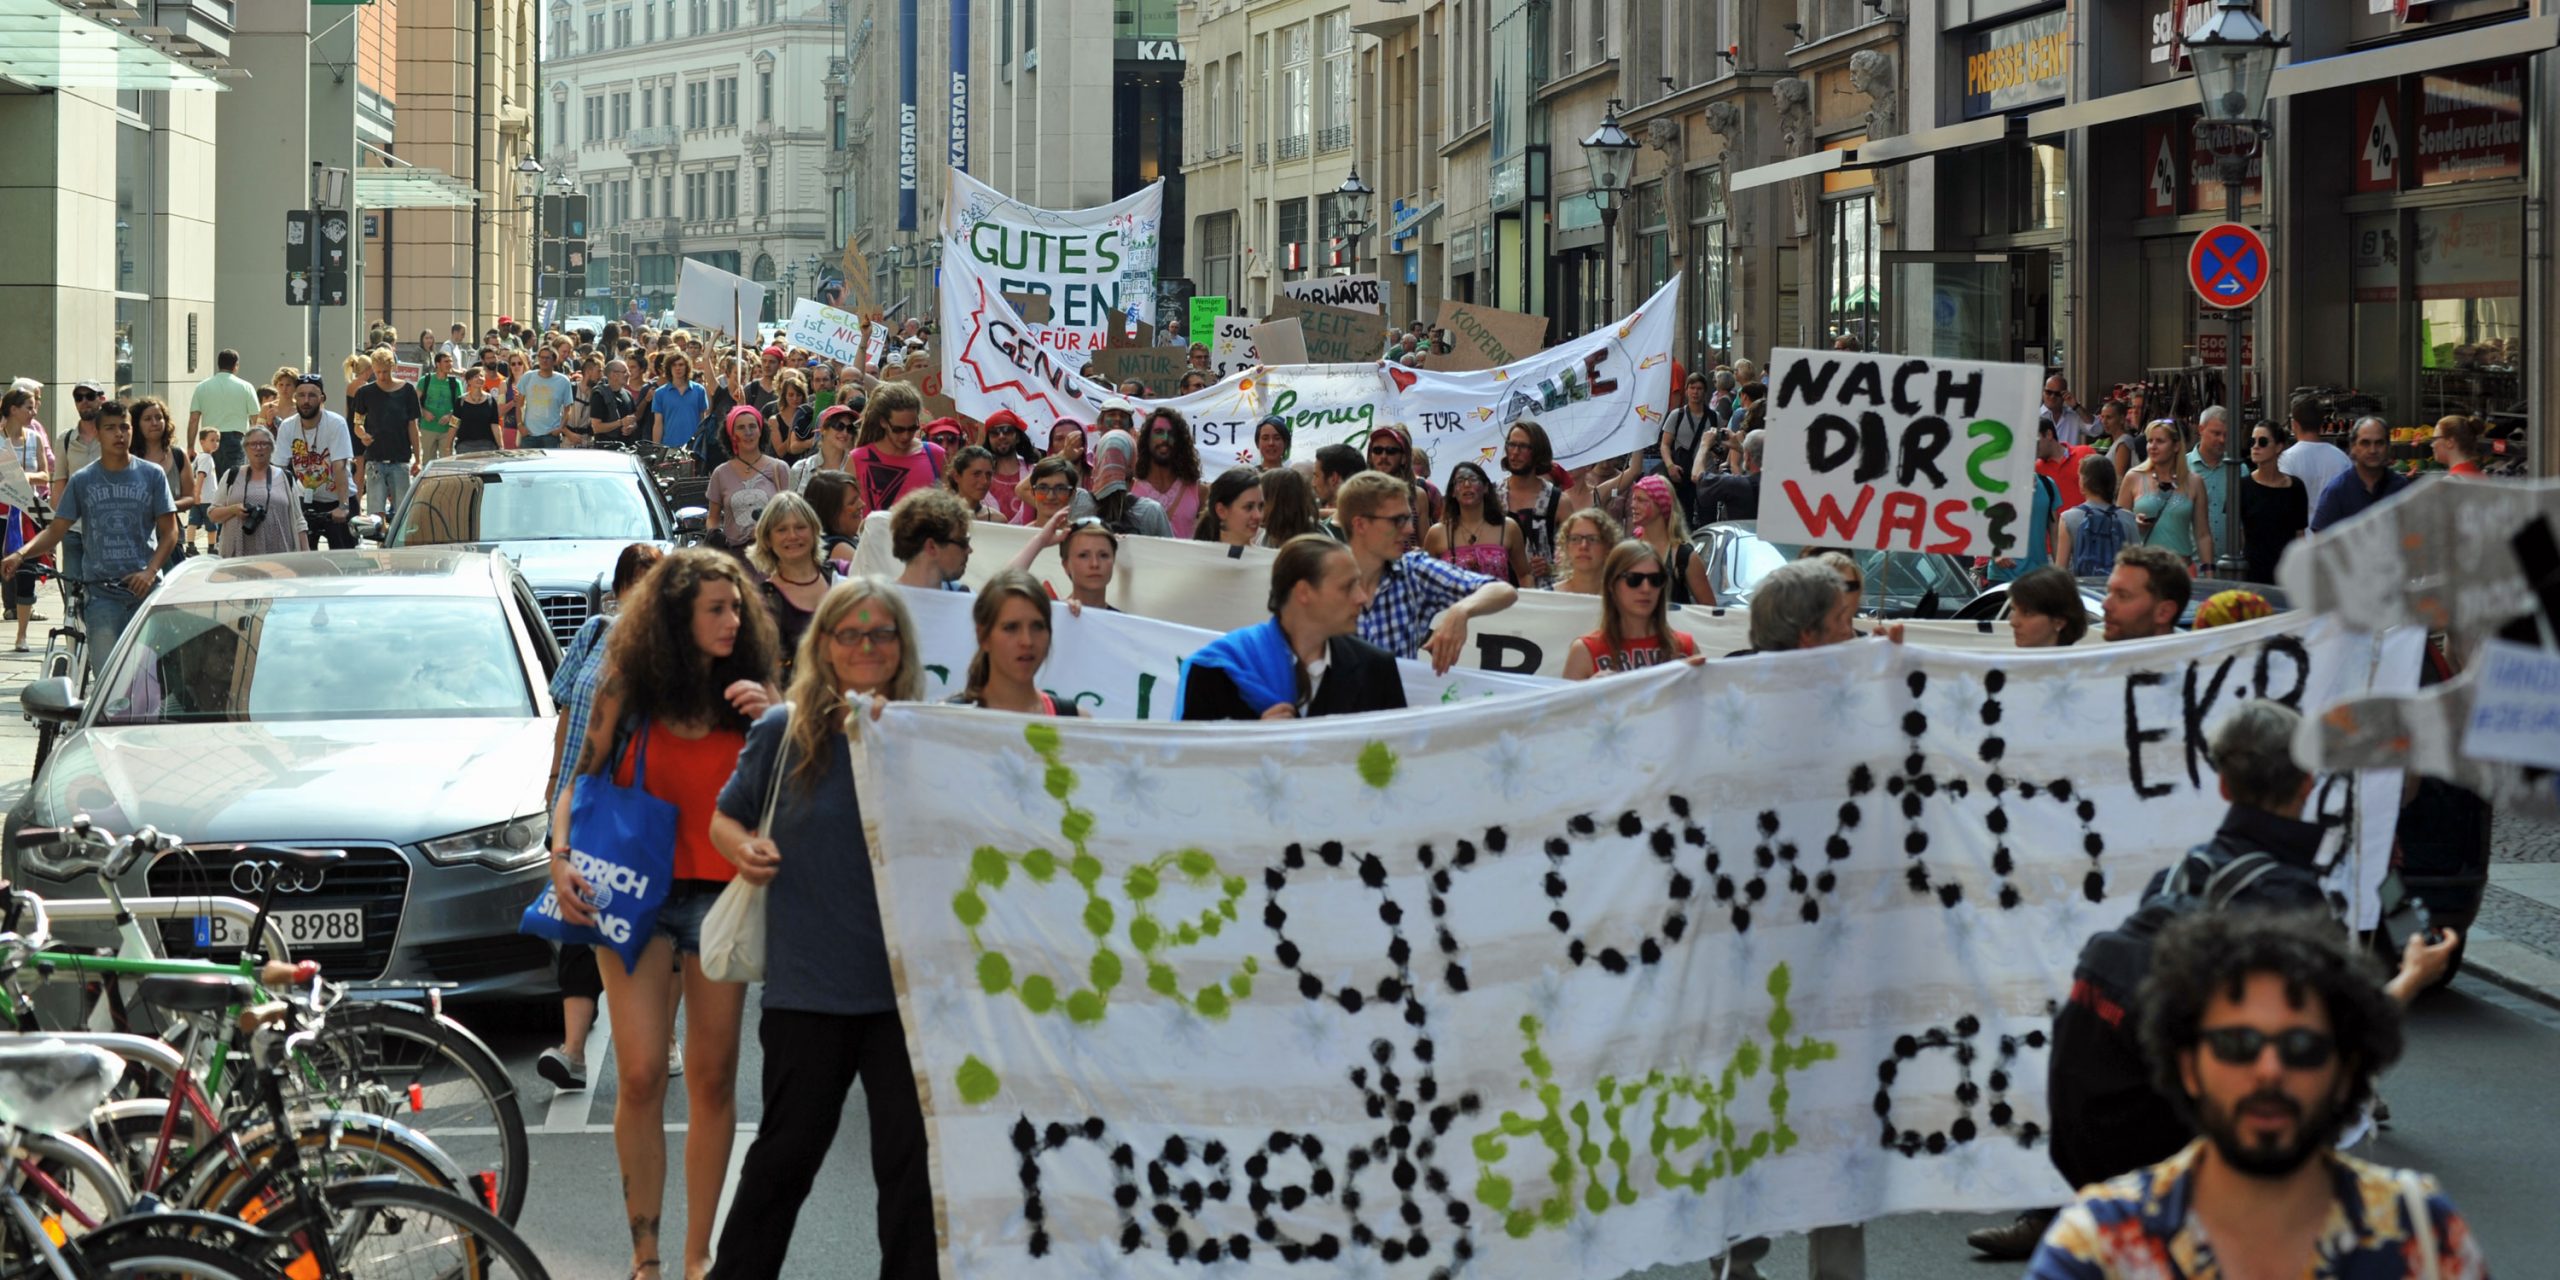 Conference Degrowth a movement gathering momentum Friends of the